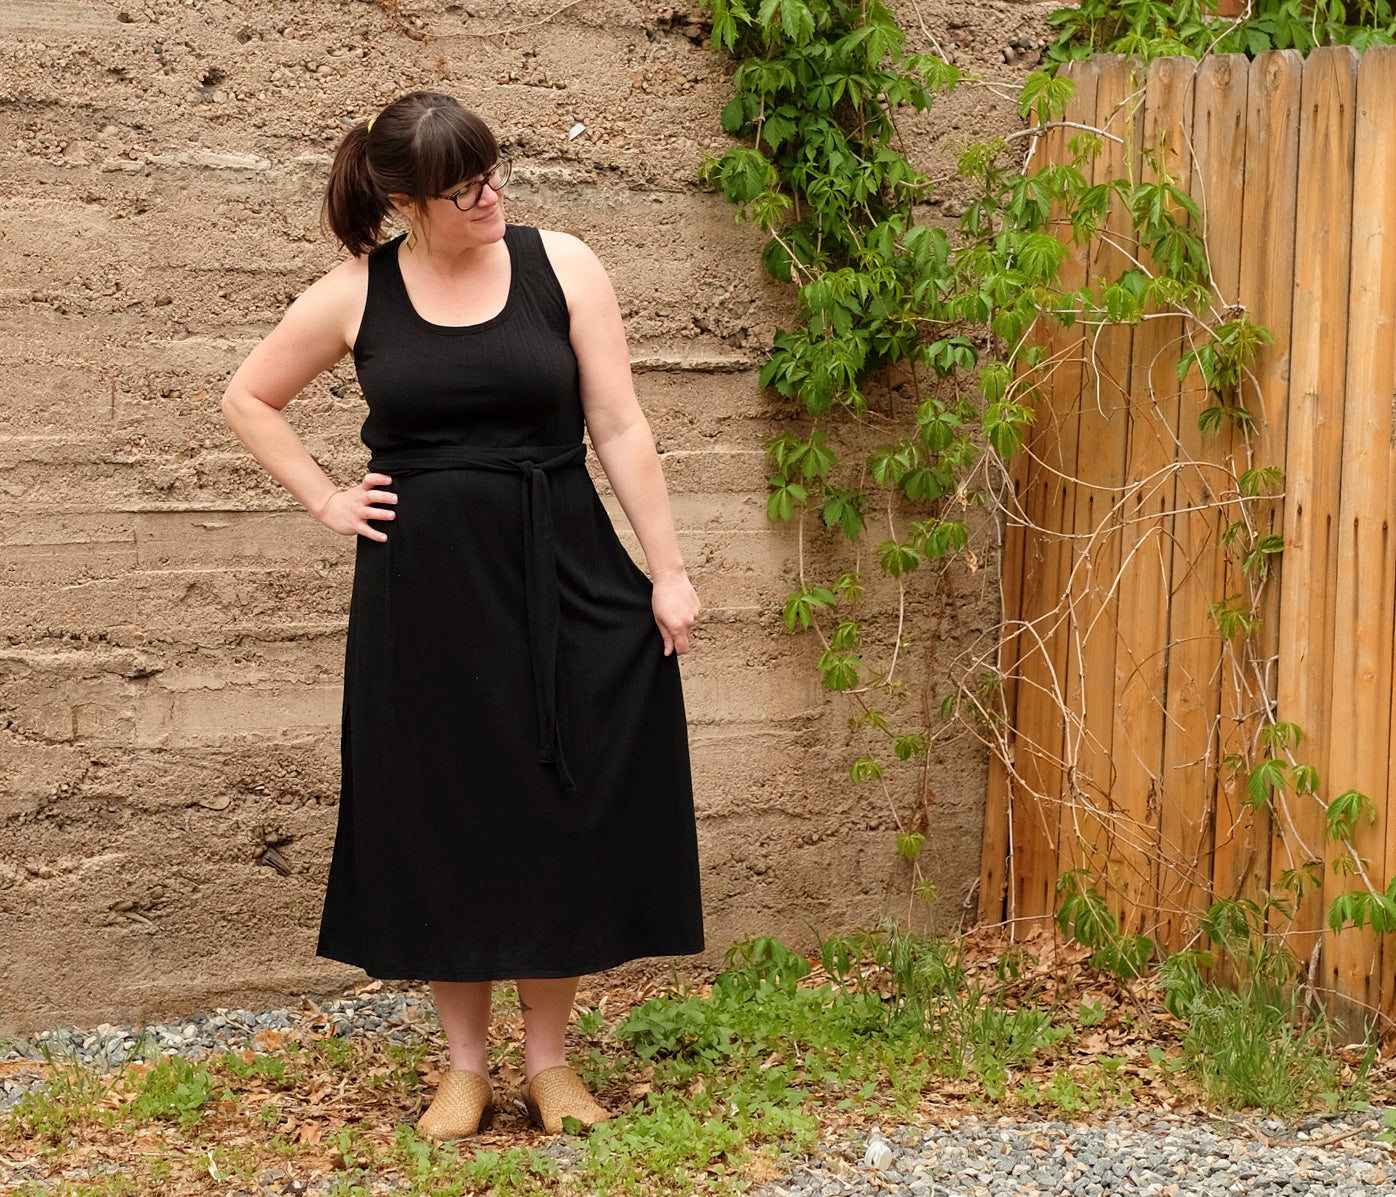 Amanda's standing in front of brick wall in handsewn maxi dress